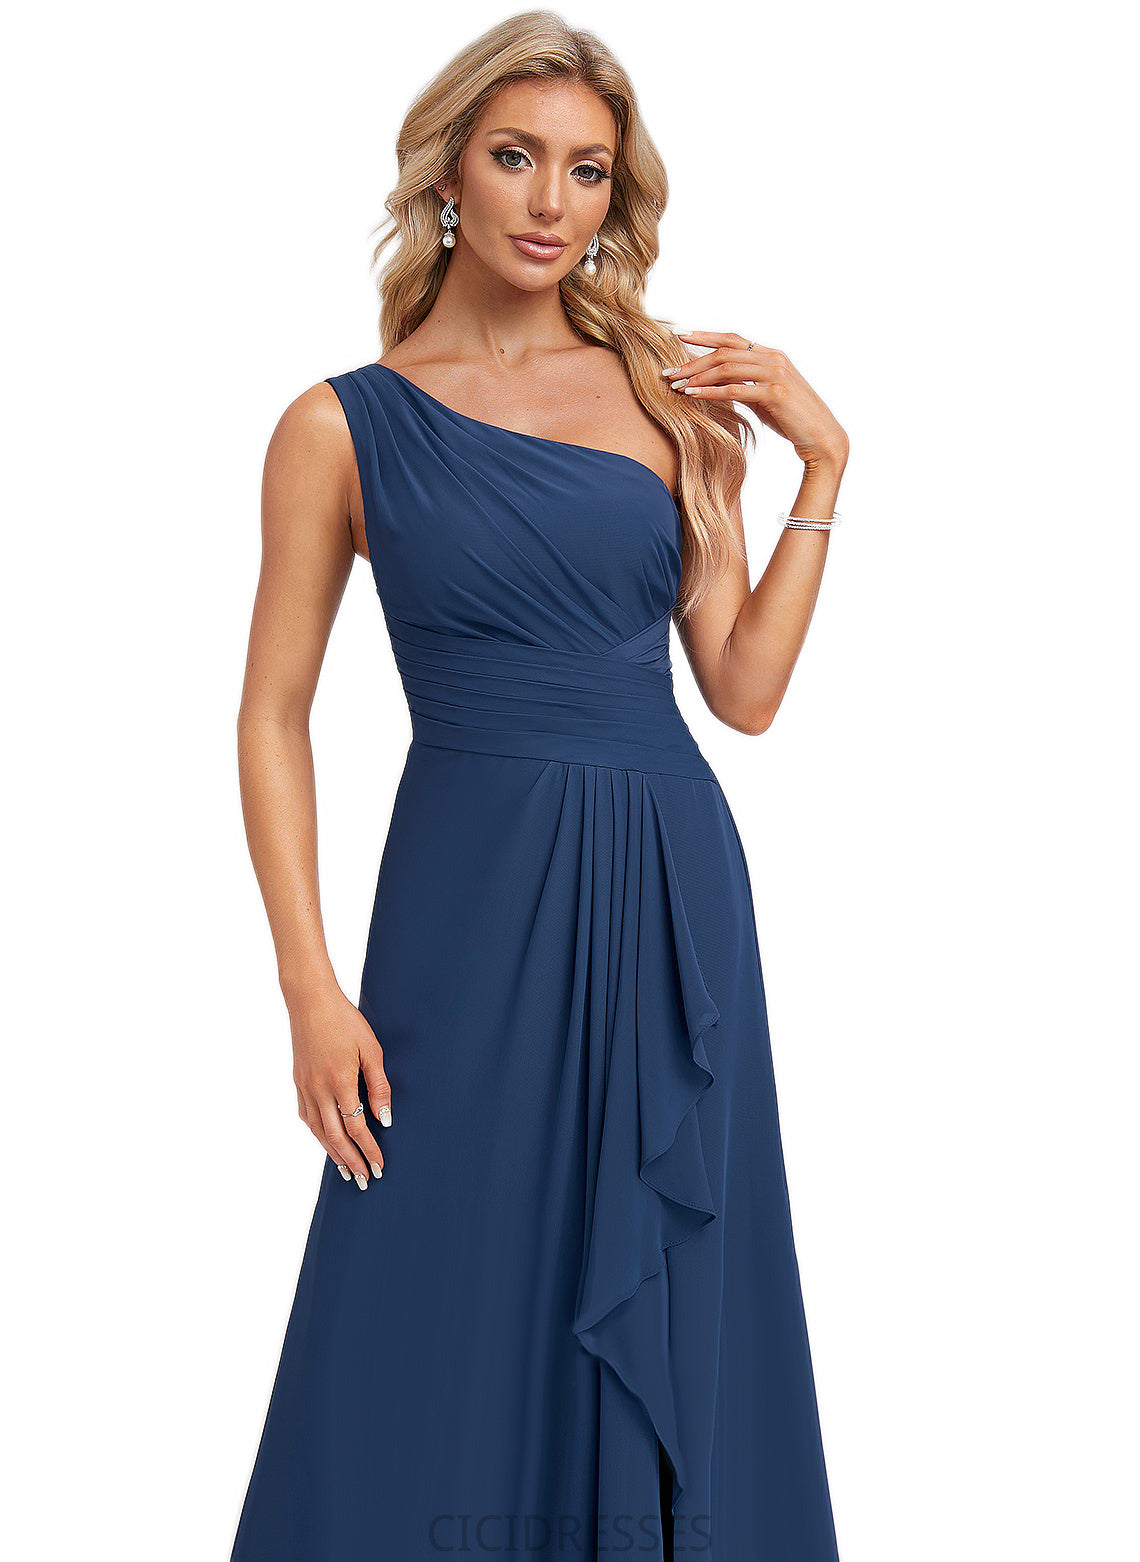 Amelie A-line One Shoulder Floor-Length Chiffon Bridesmaid Dress With Ruffle CIC8P0022581